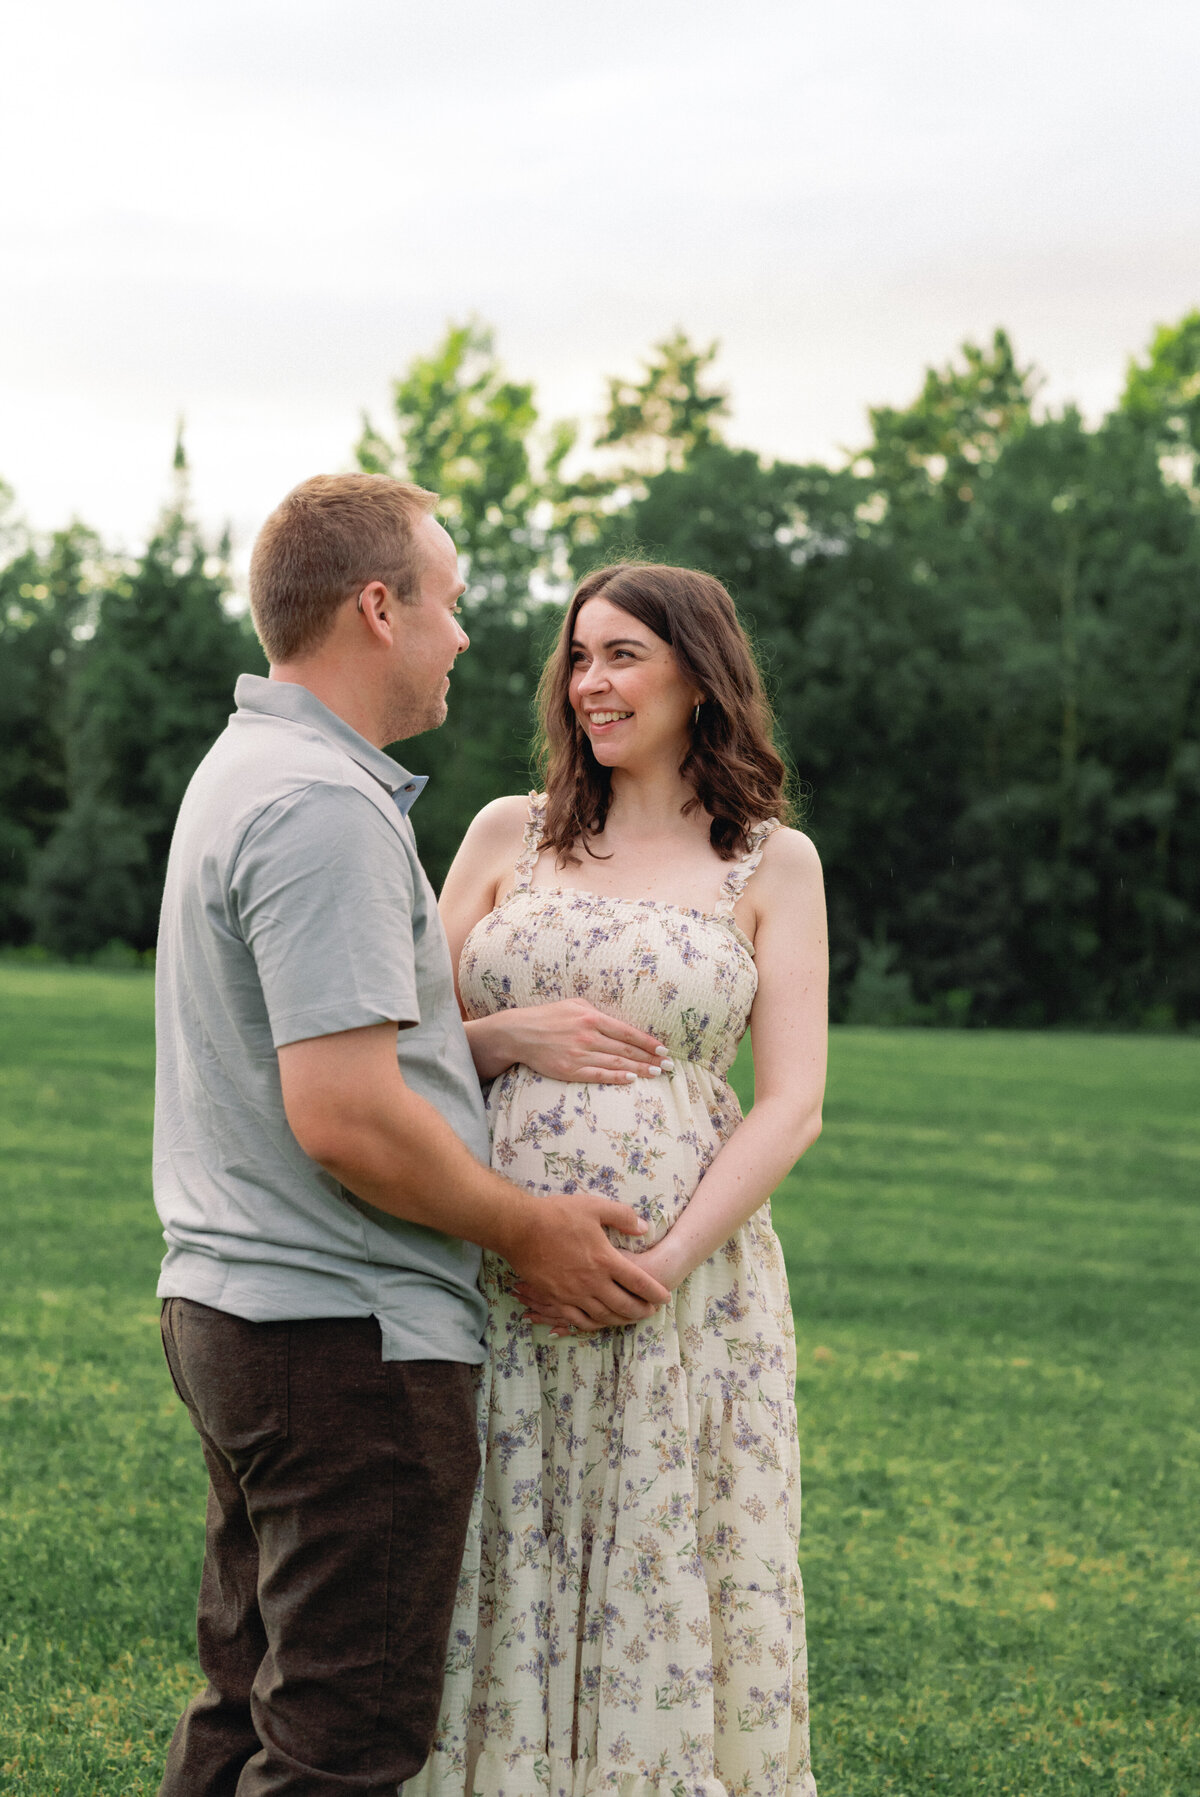 Expecting mother laughing while holding baby bump